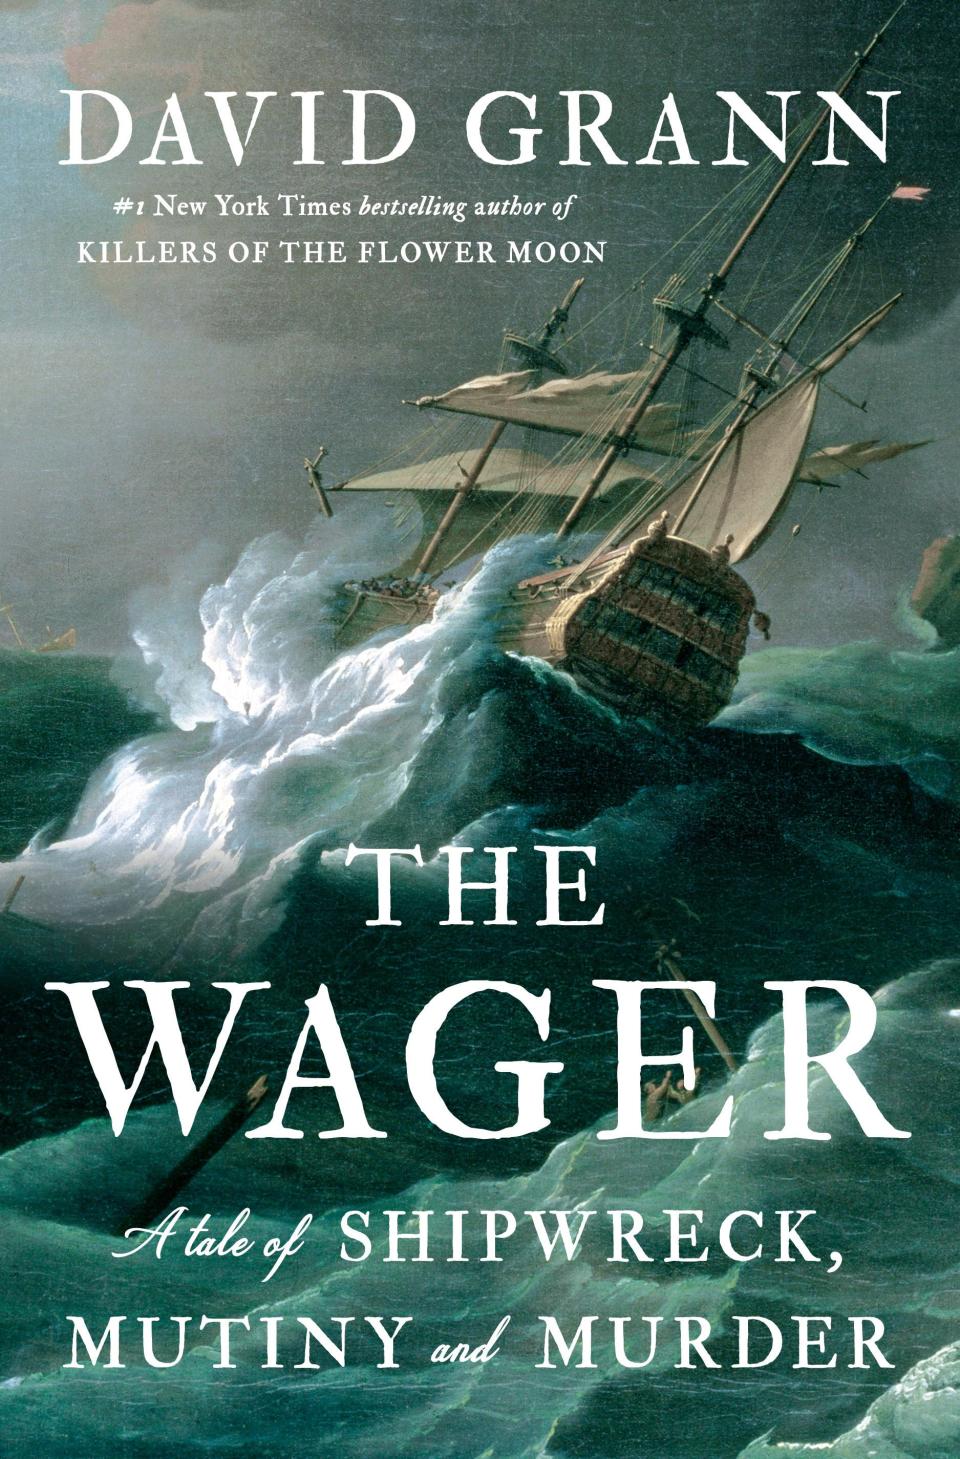 In David Grann's "The Wager," shipwrecked seamen exhibit both the best and worst sides of human nature.